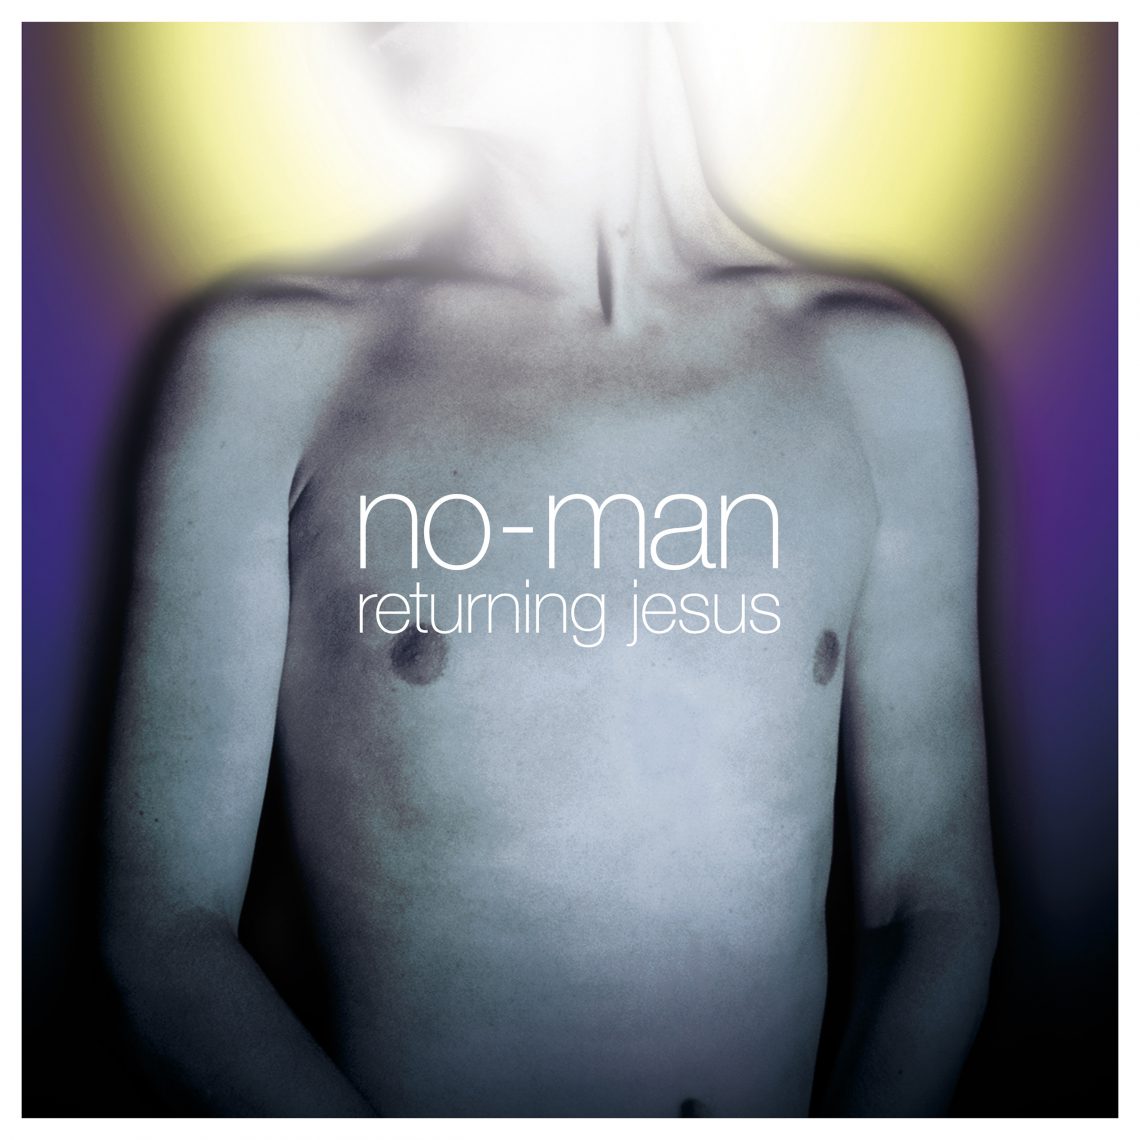 Kscope to release the 2001 fourth album from No-Man on 2 CD & 2LP for the first time